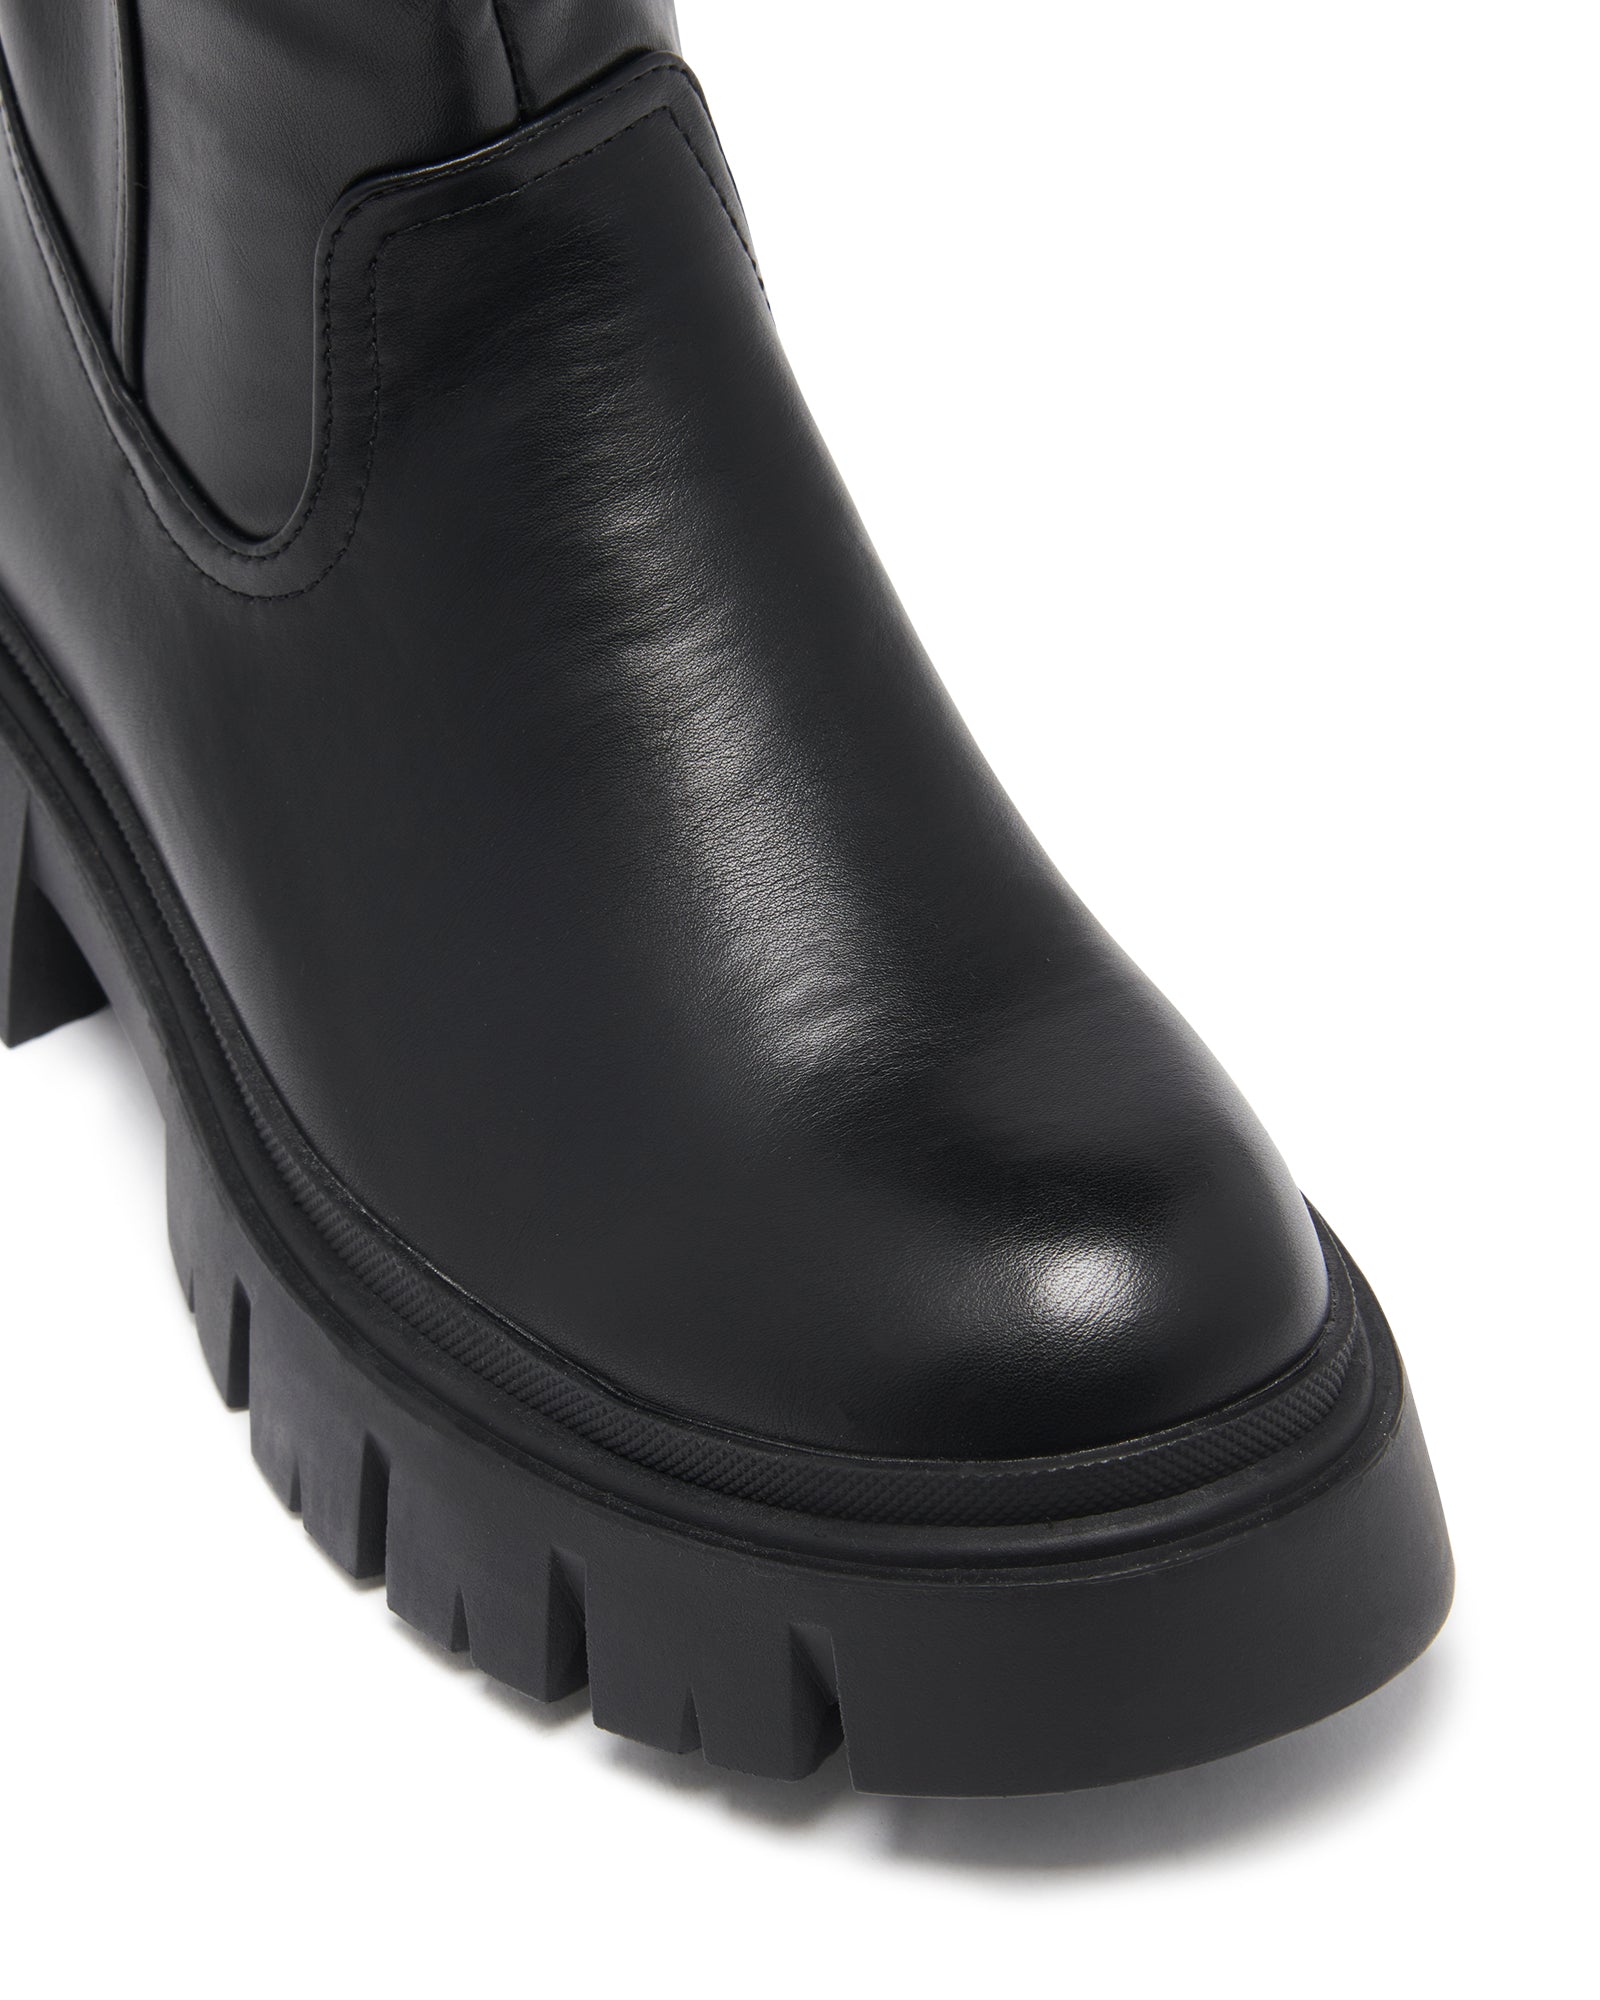 Therapy Shoes Indy Black | Women's Boots | Mid Calf | Chunky | Grunge